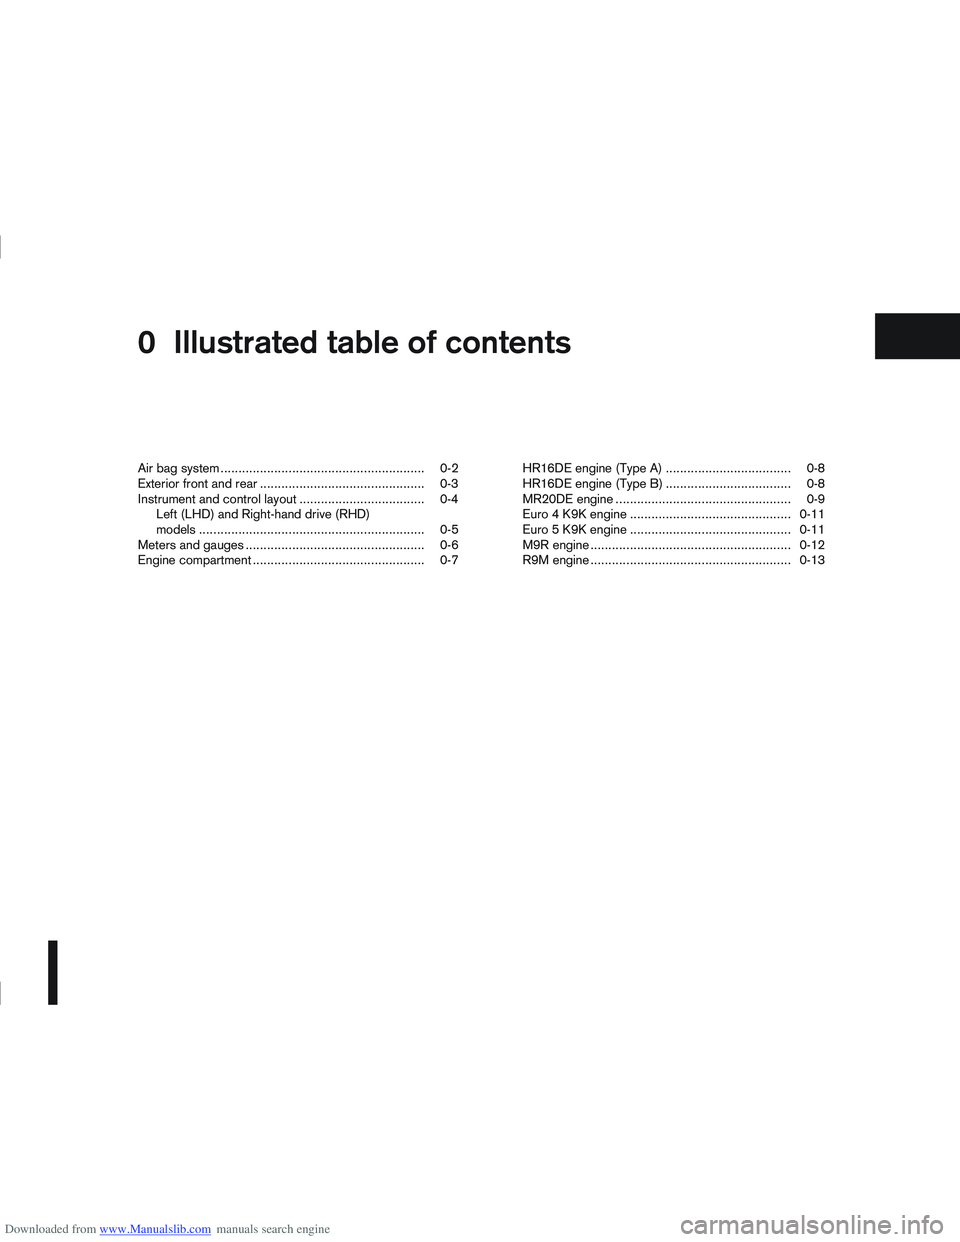 NISSAN QASHQAI 2009  Owners Manual Downloaded from www.Manualslib.com manuals search engine 0Illustrated table of contents
Illustrated table of contents
Air bag system ......................................................... 0-2
Exter